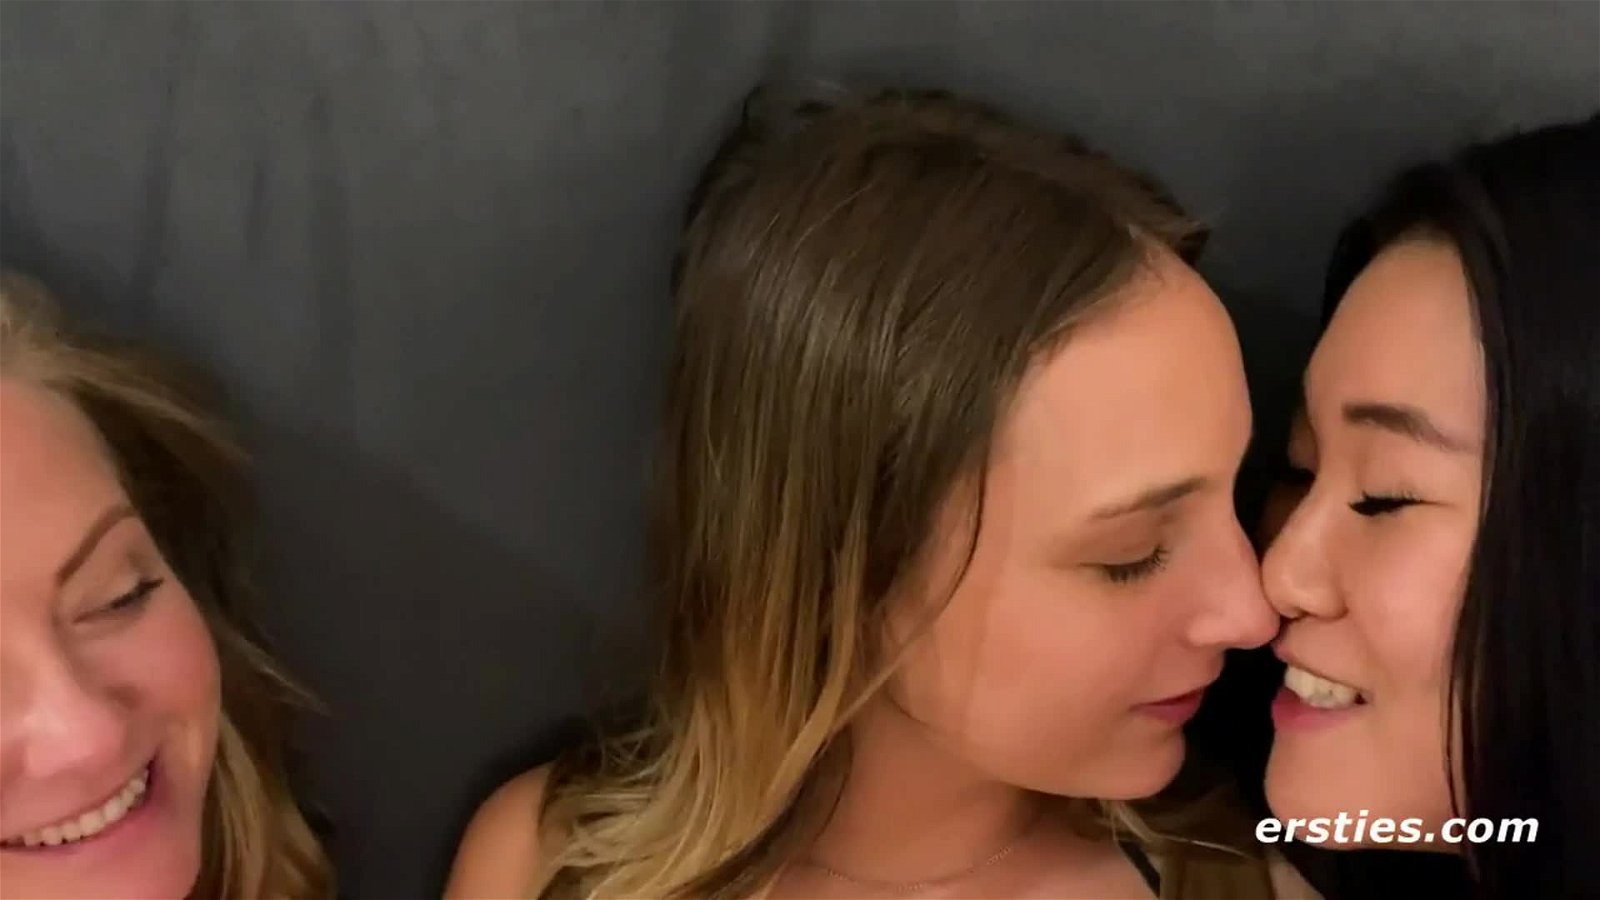 Video post by Emily5